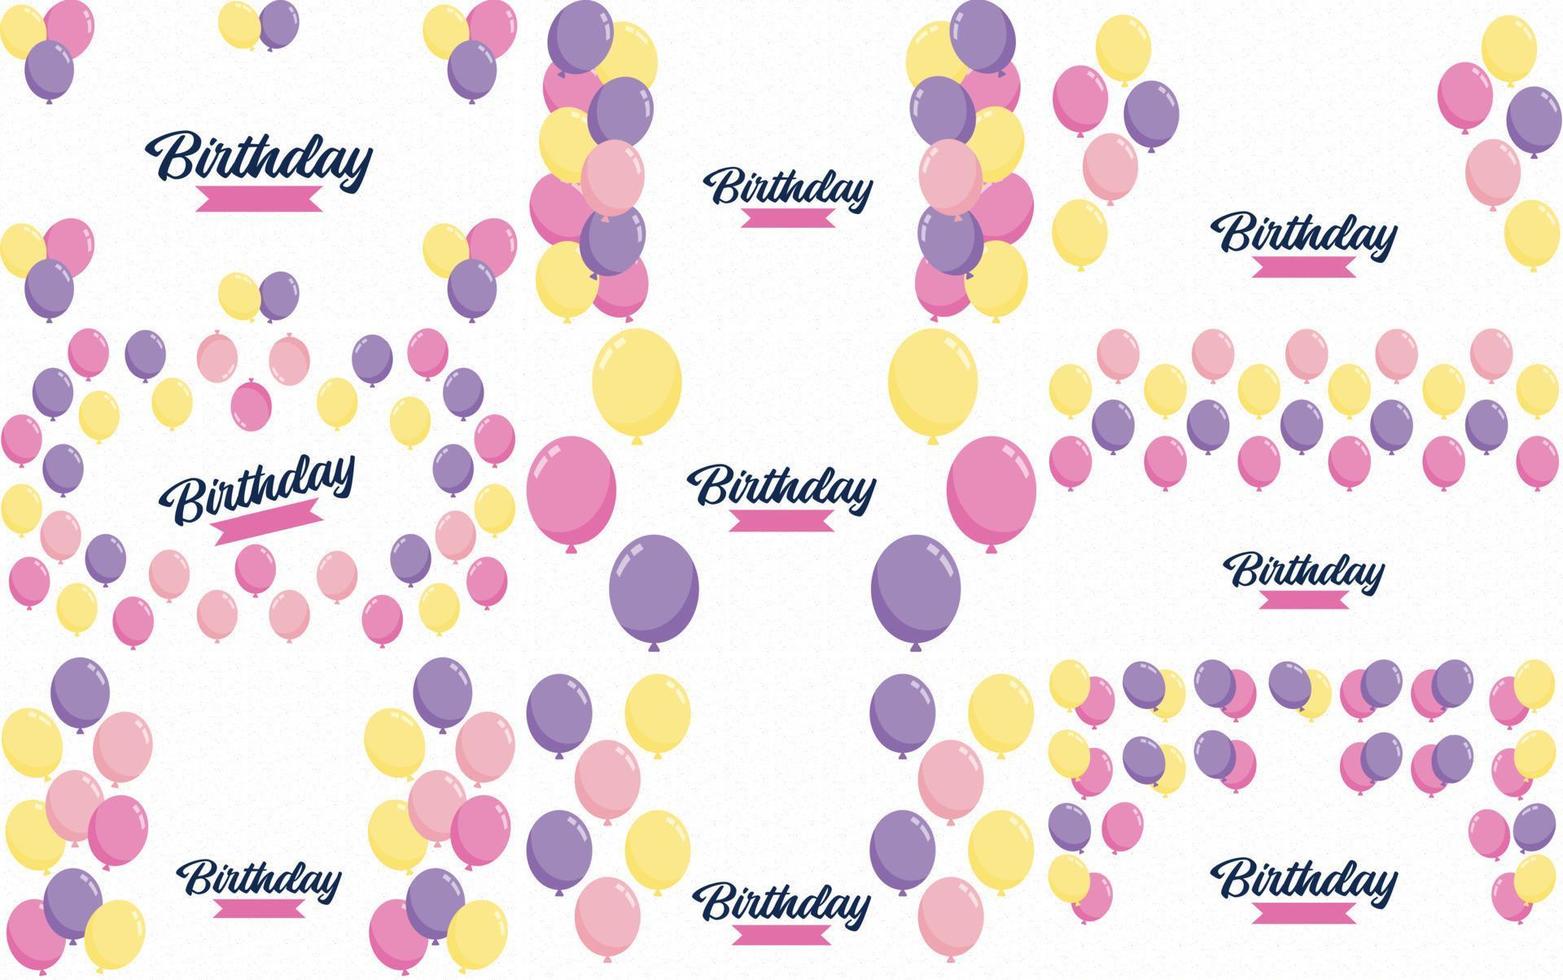 Happy Birthday in a playful. hand-drawn font with a background of balloons and confetti. vector